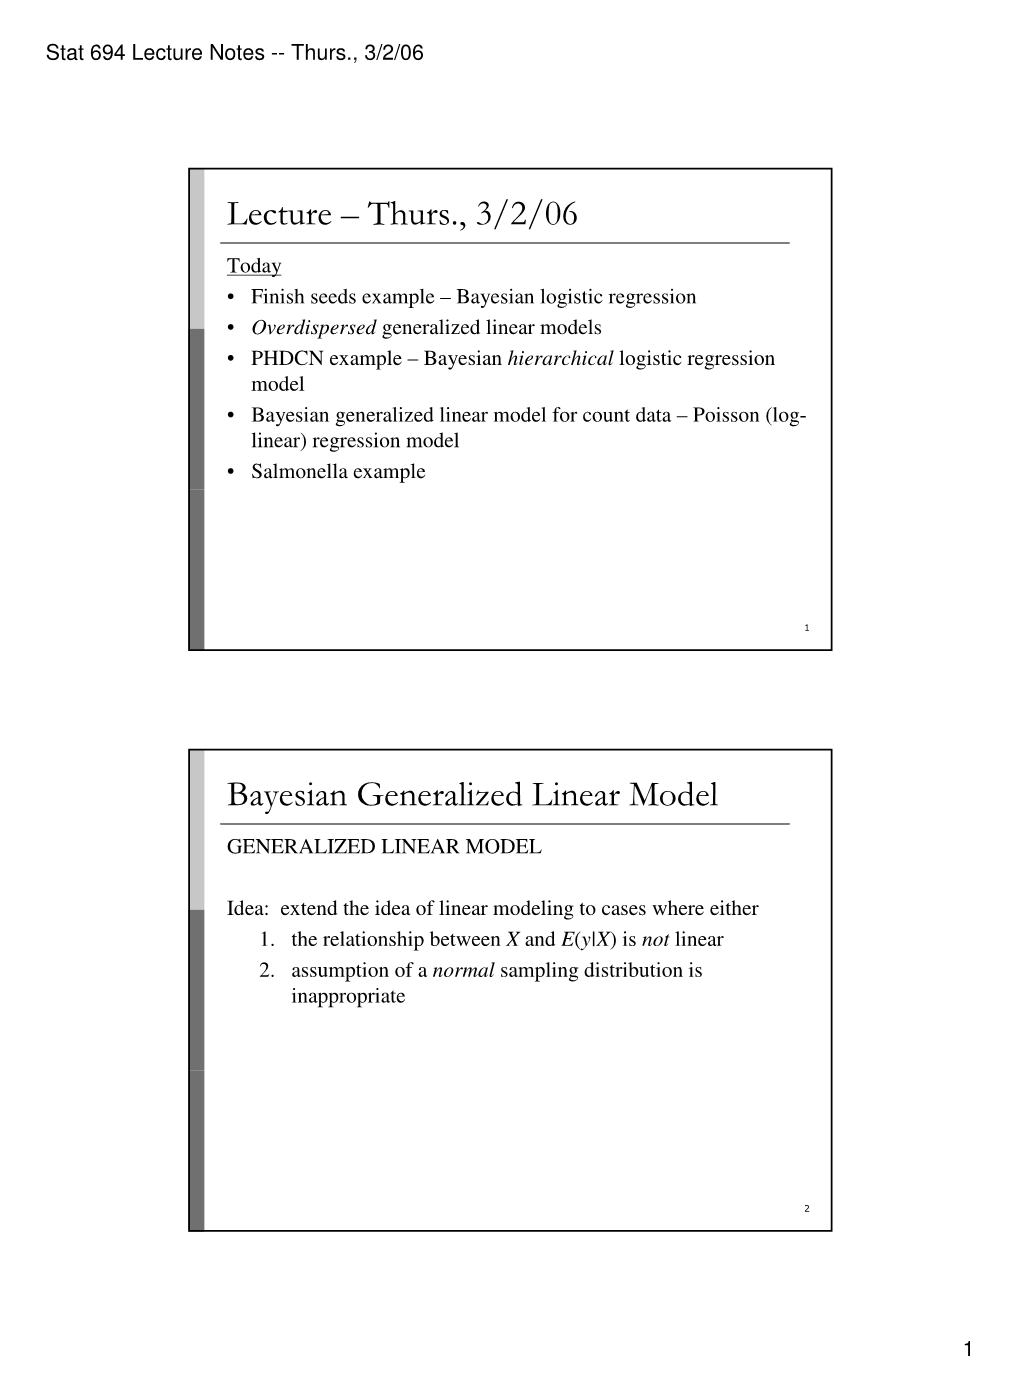 Lecture – Thurs., 3/2/06 Bayesian Generalized Linear Model